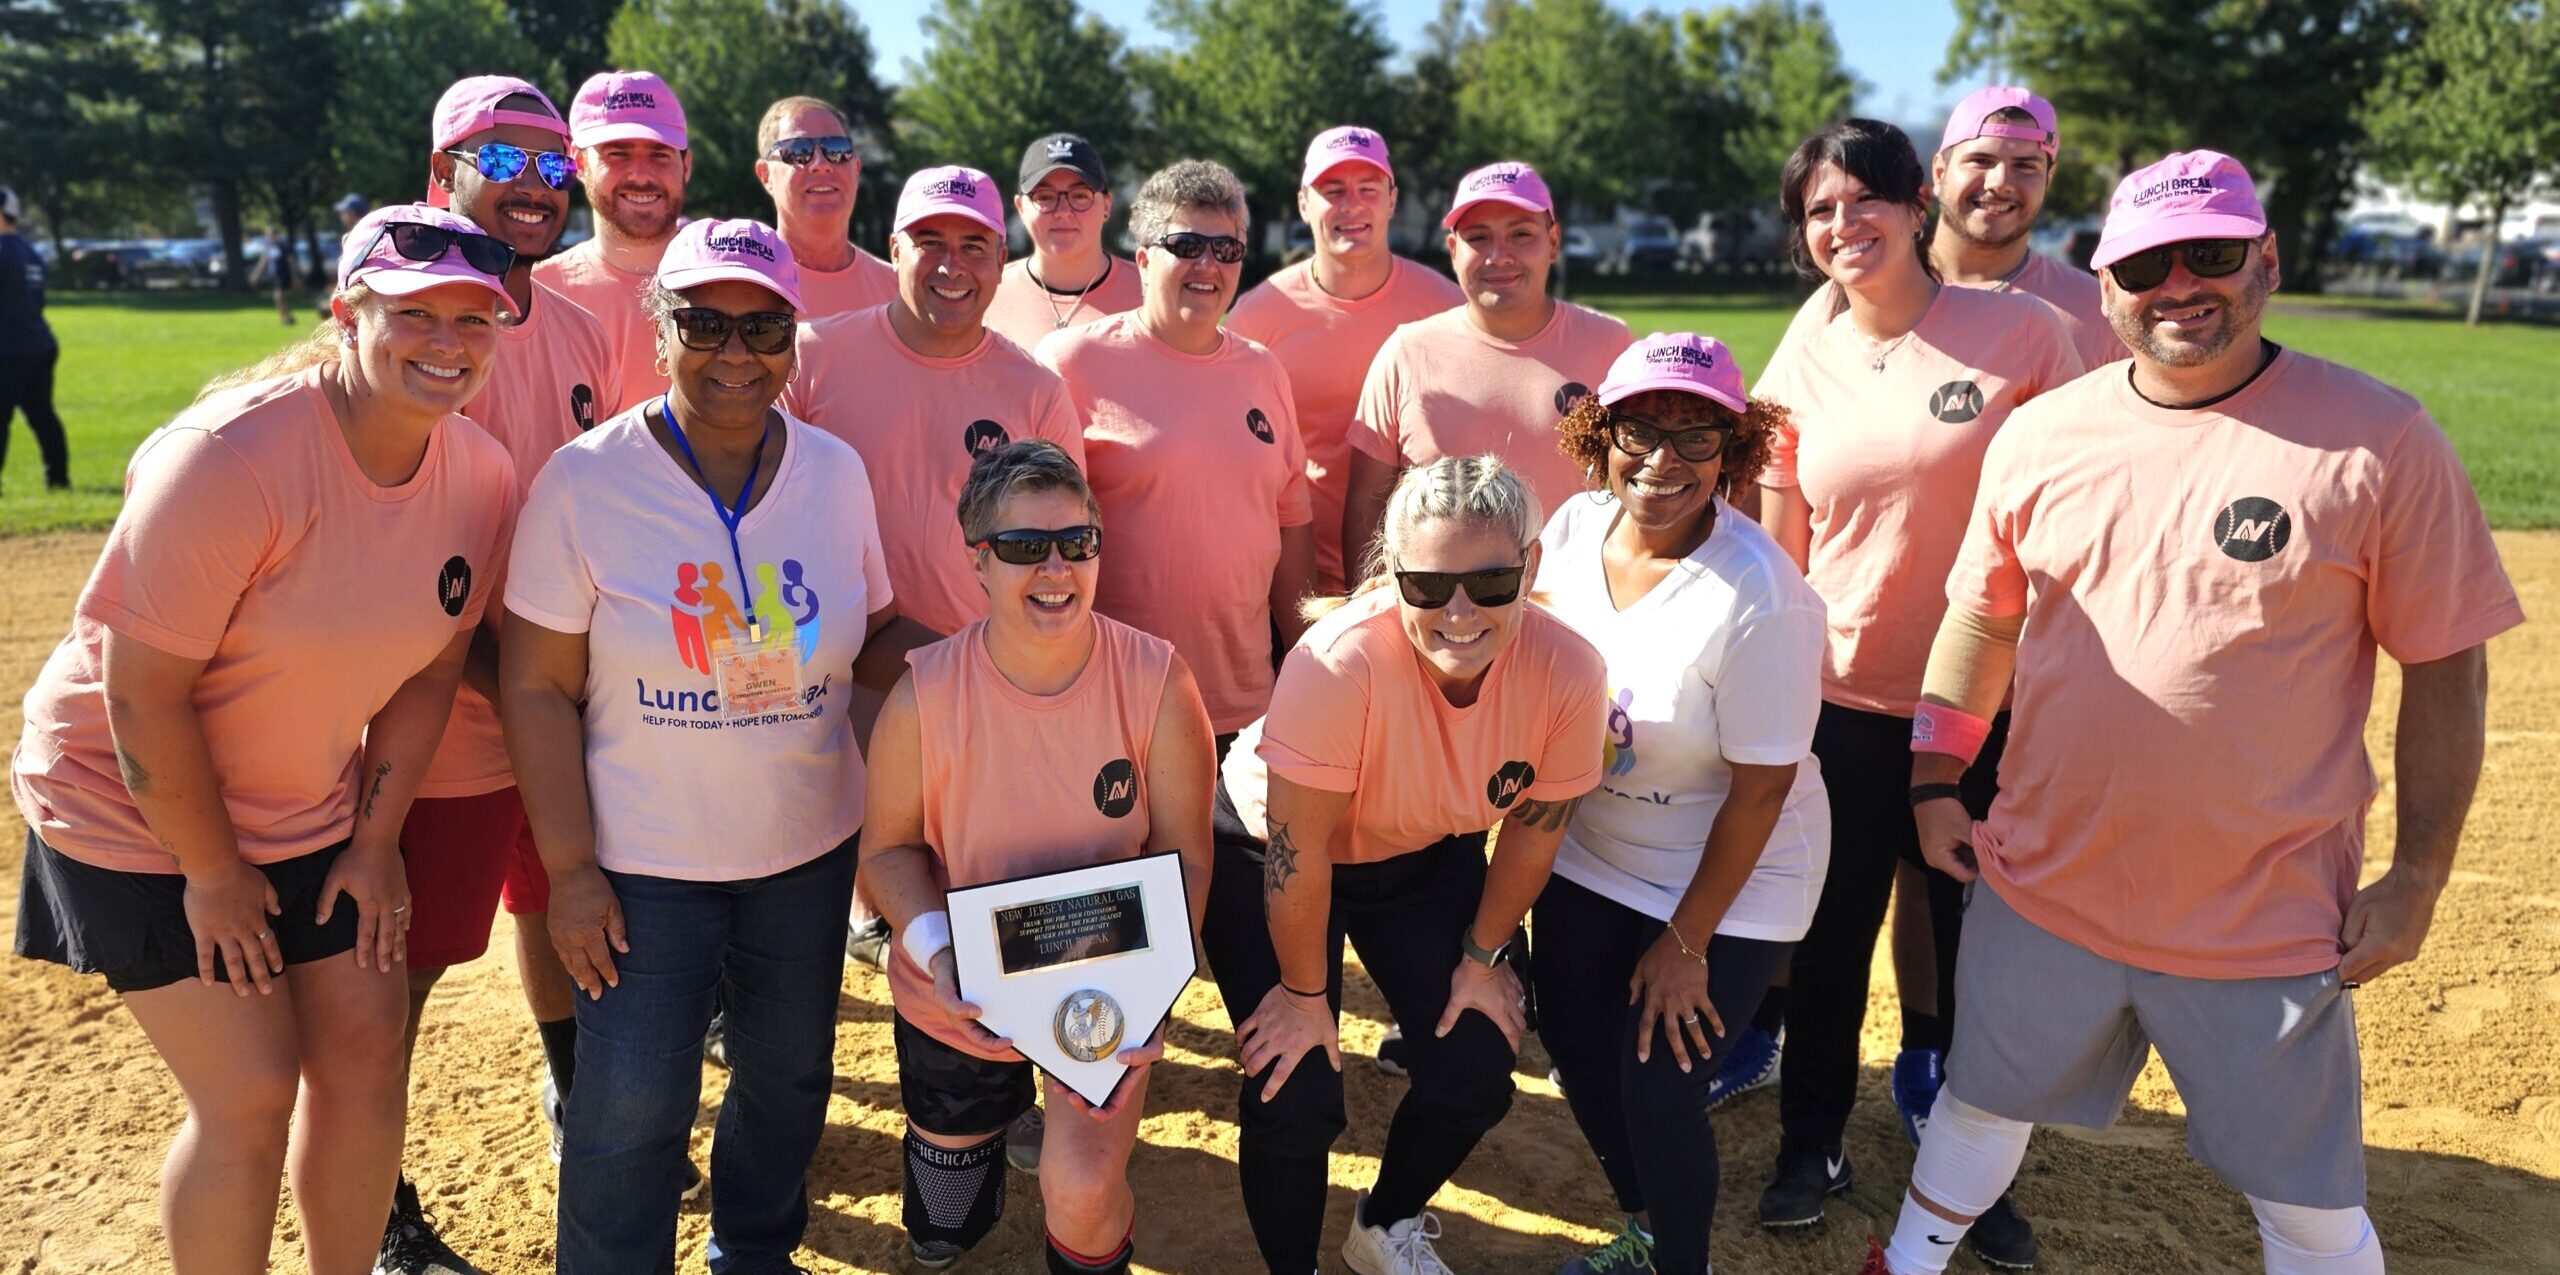 Lunch Break team holding a softball trophy on the field